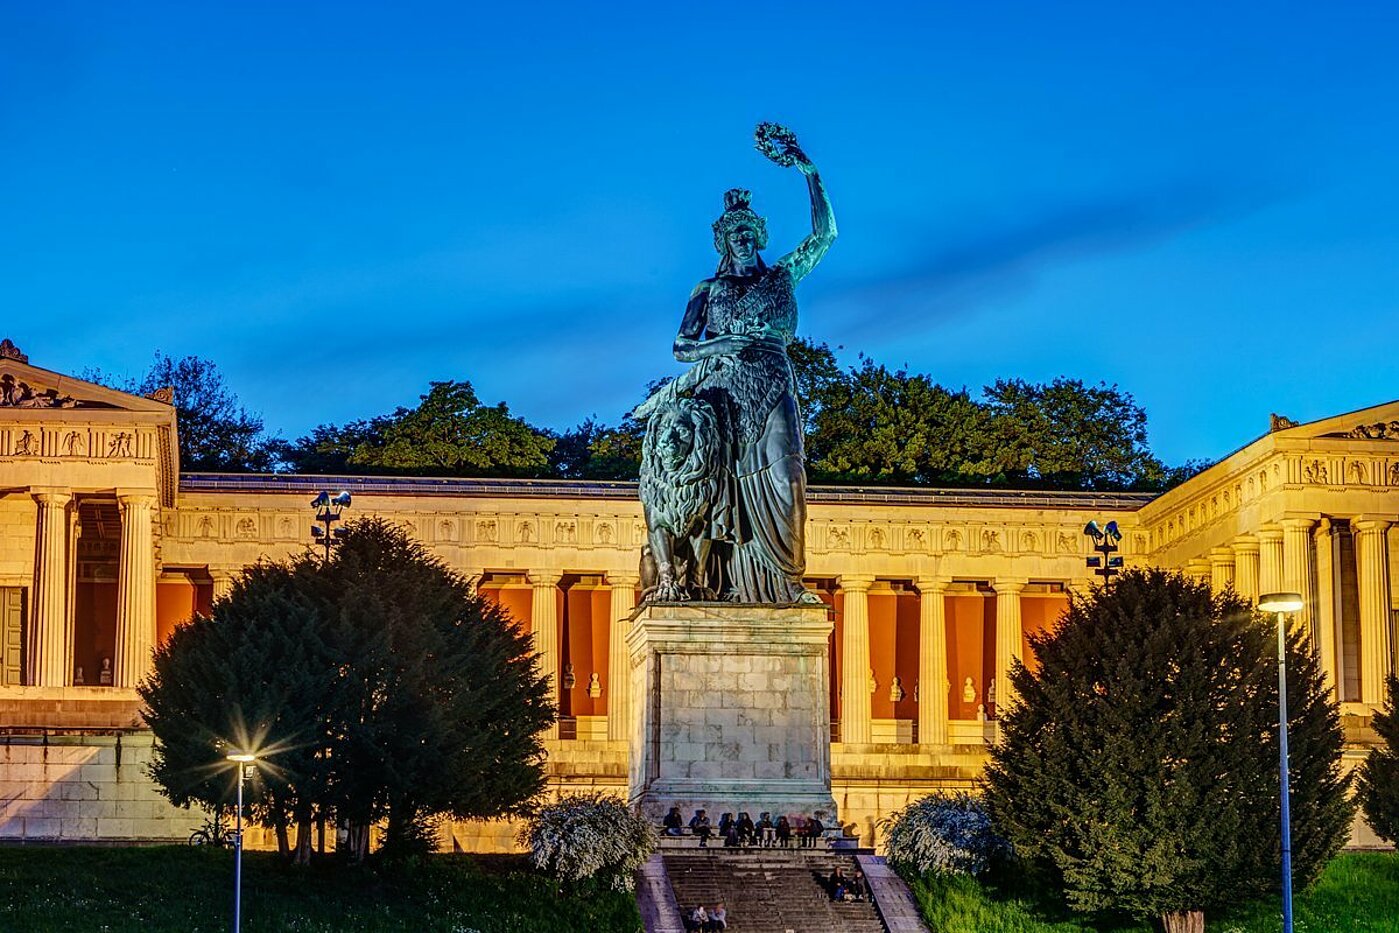 The photo shows the statue of Bavaria in the foreground with a pink sunset in the background